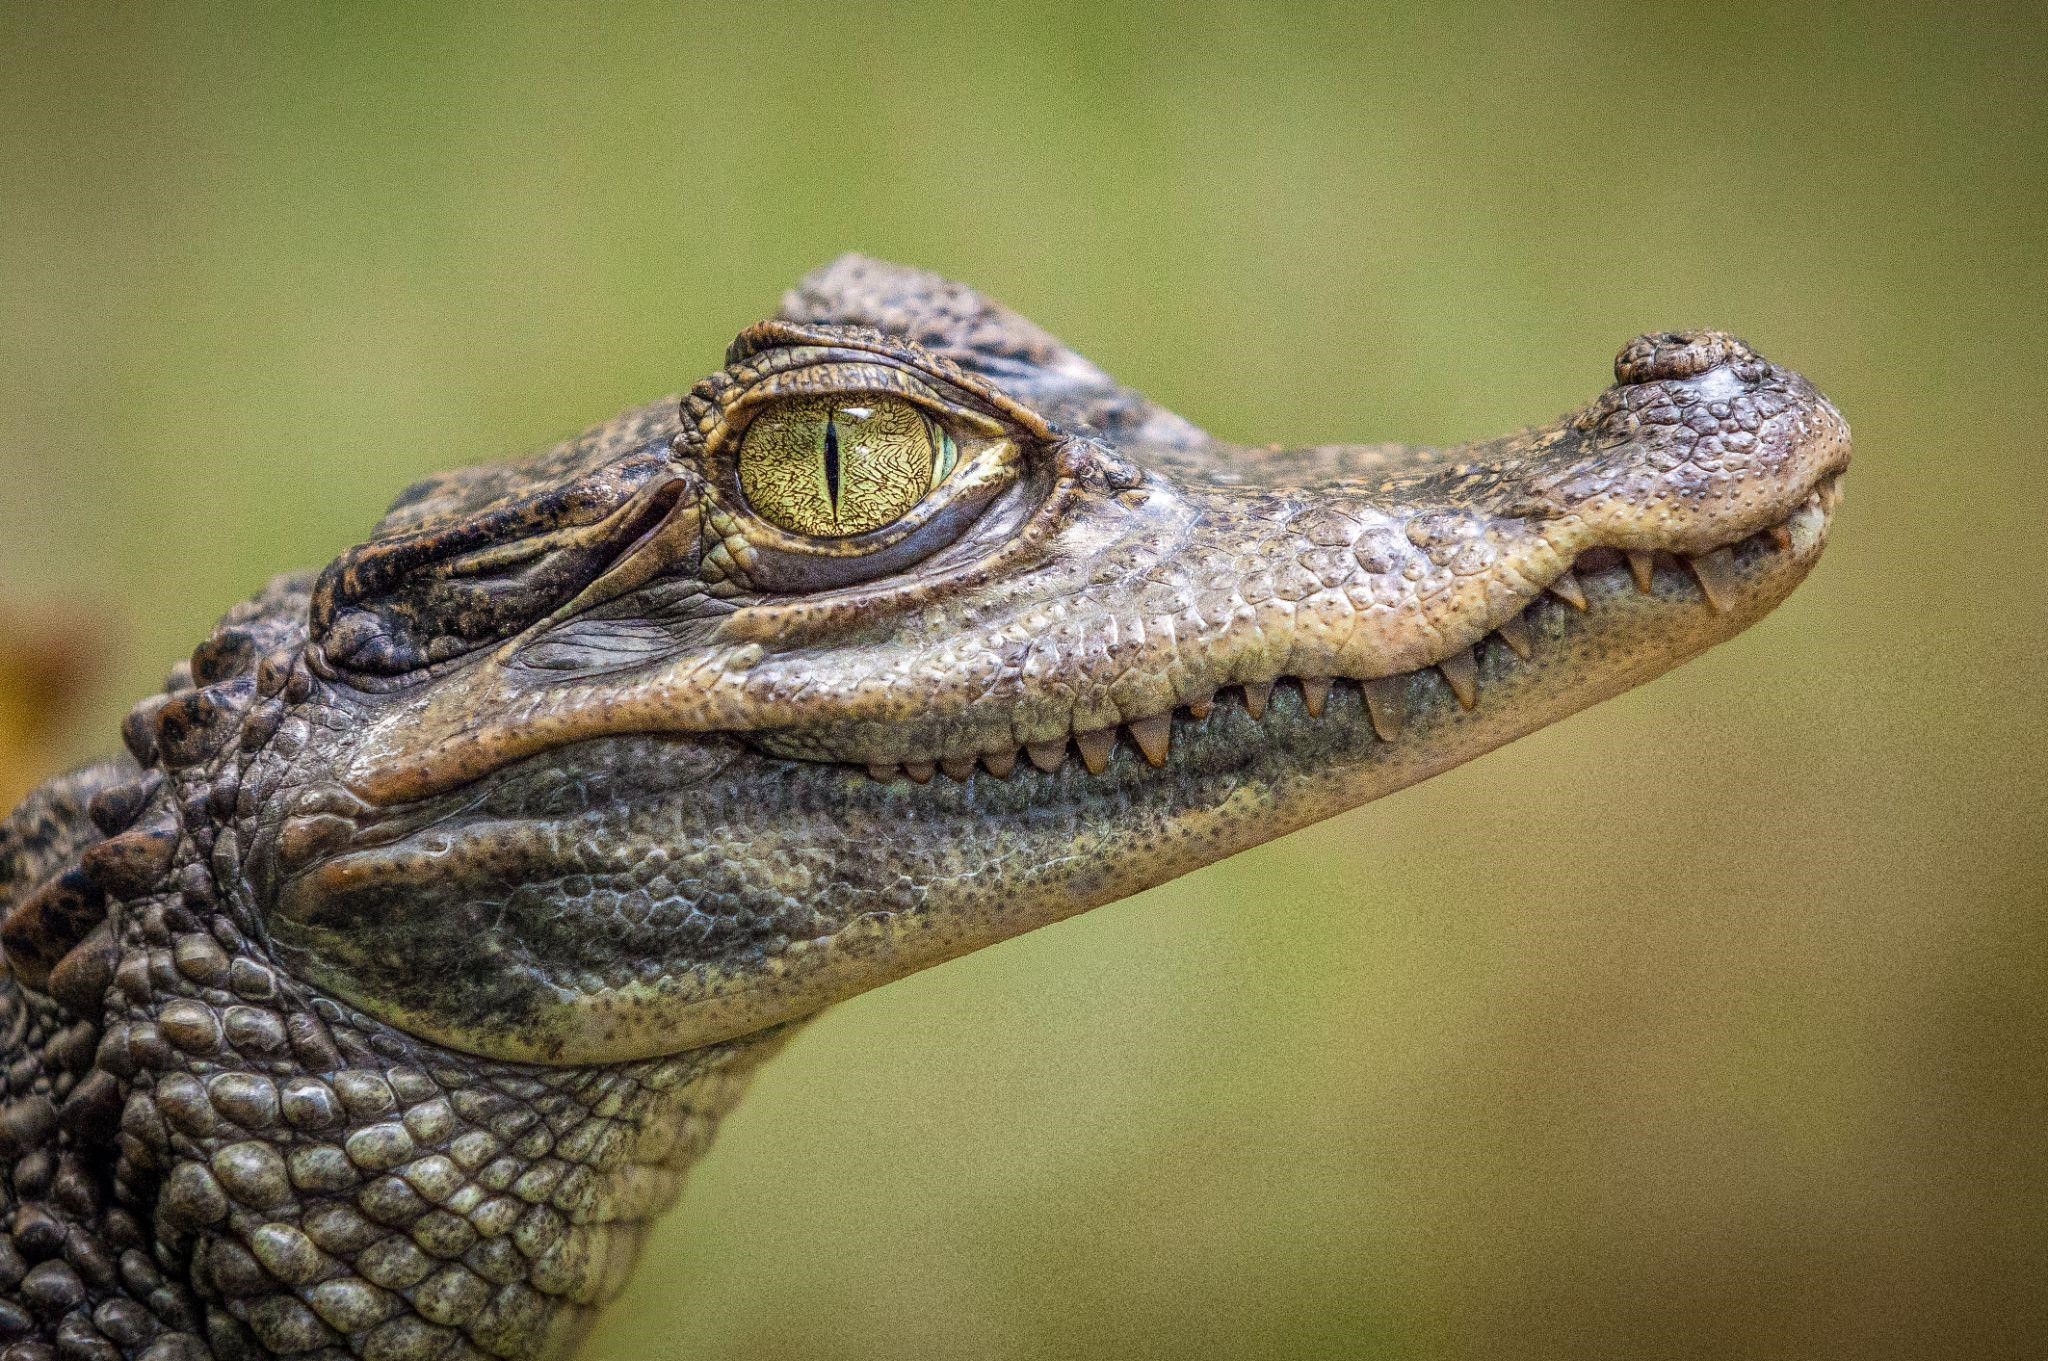 Close-up of a young alligator